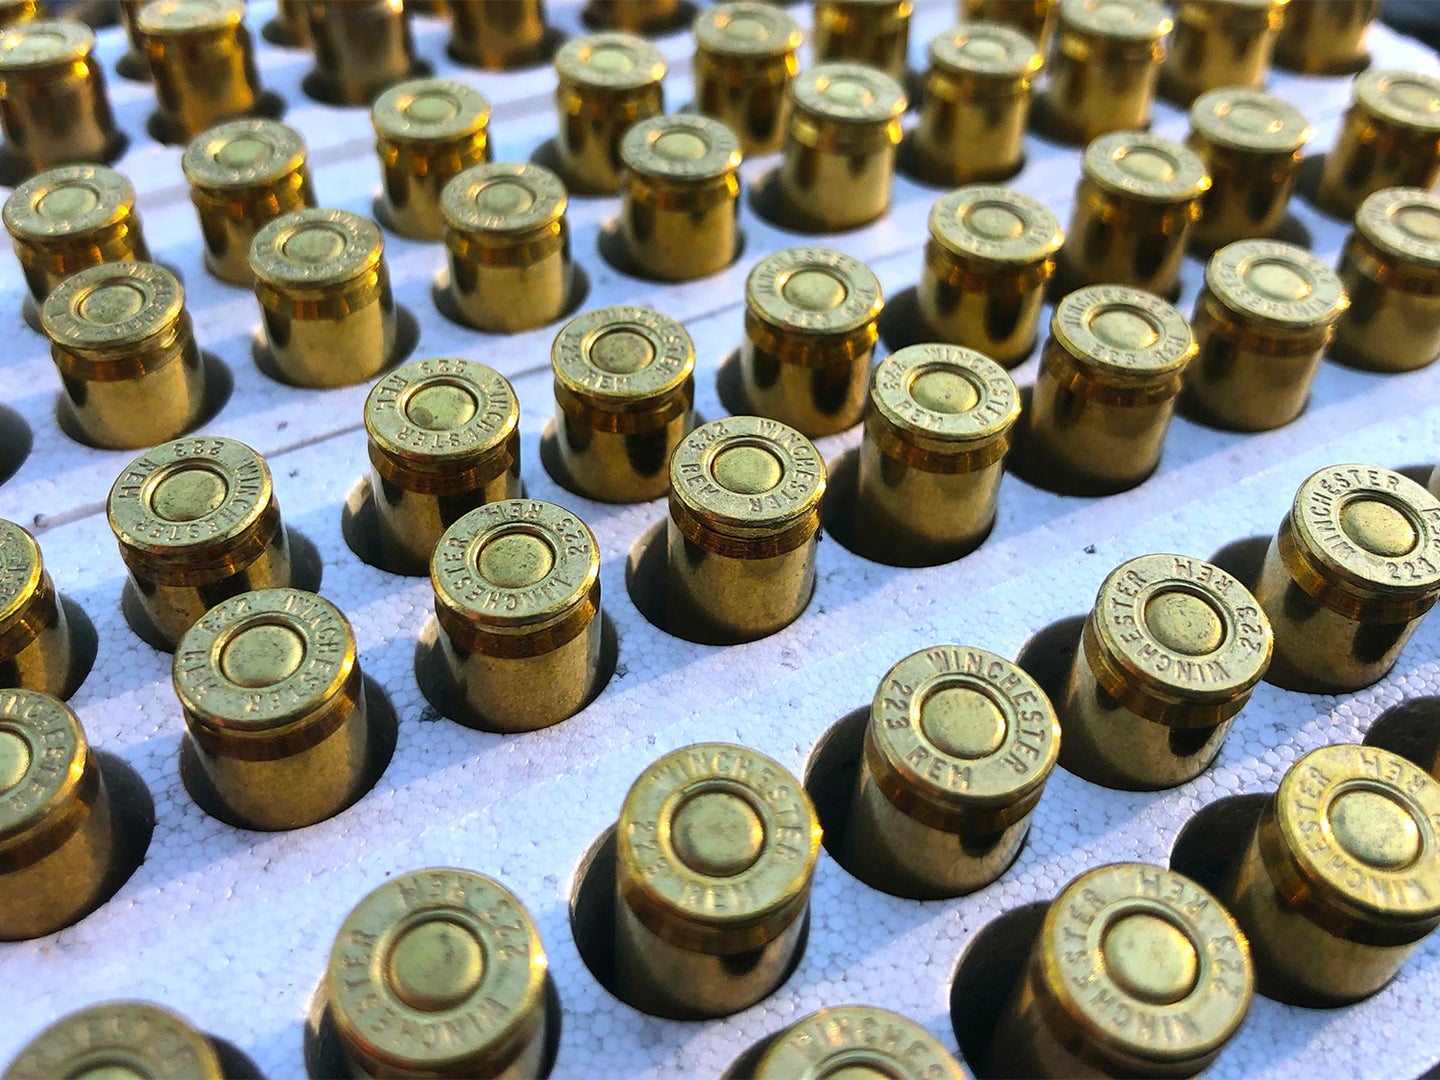 A grouping of ammunition in a holder casing.